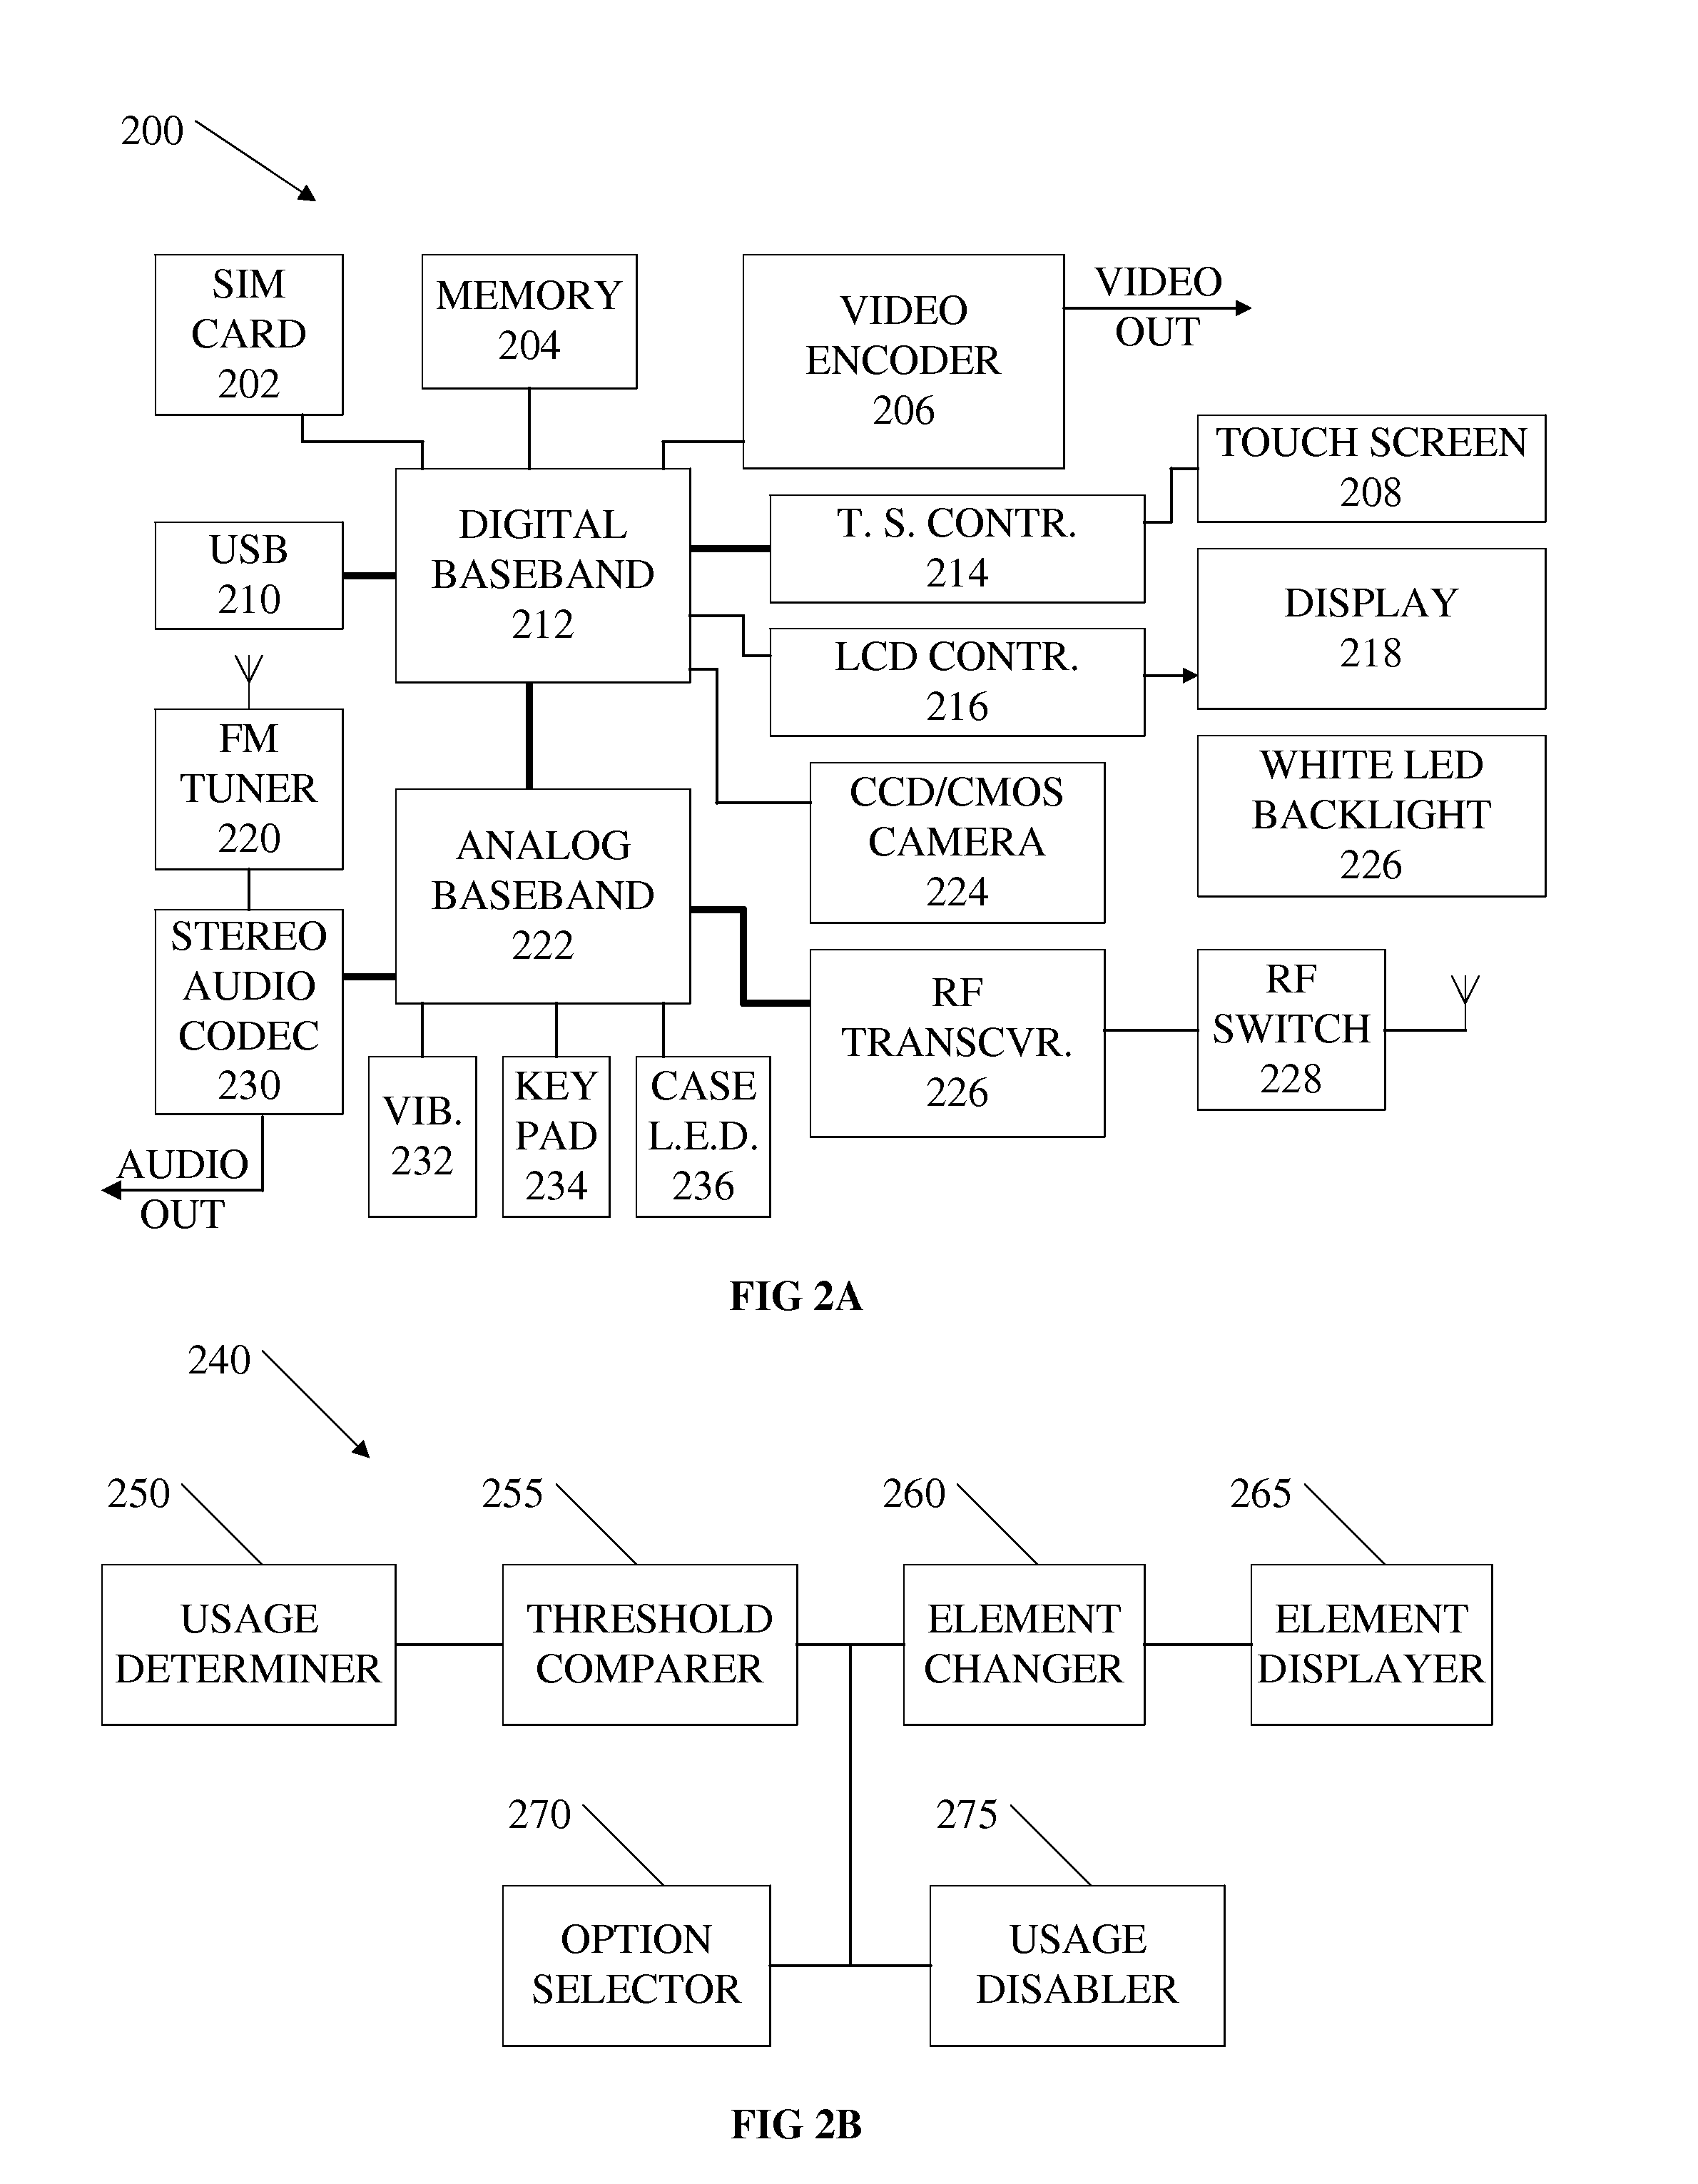 Ambient Information for Usage of Wireless Communication Devices